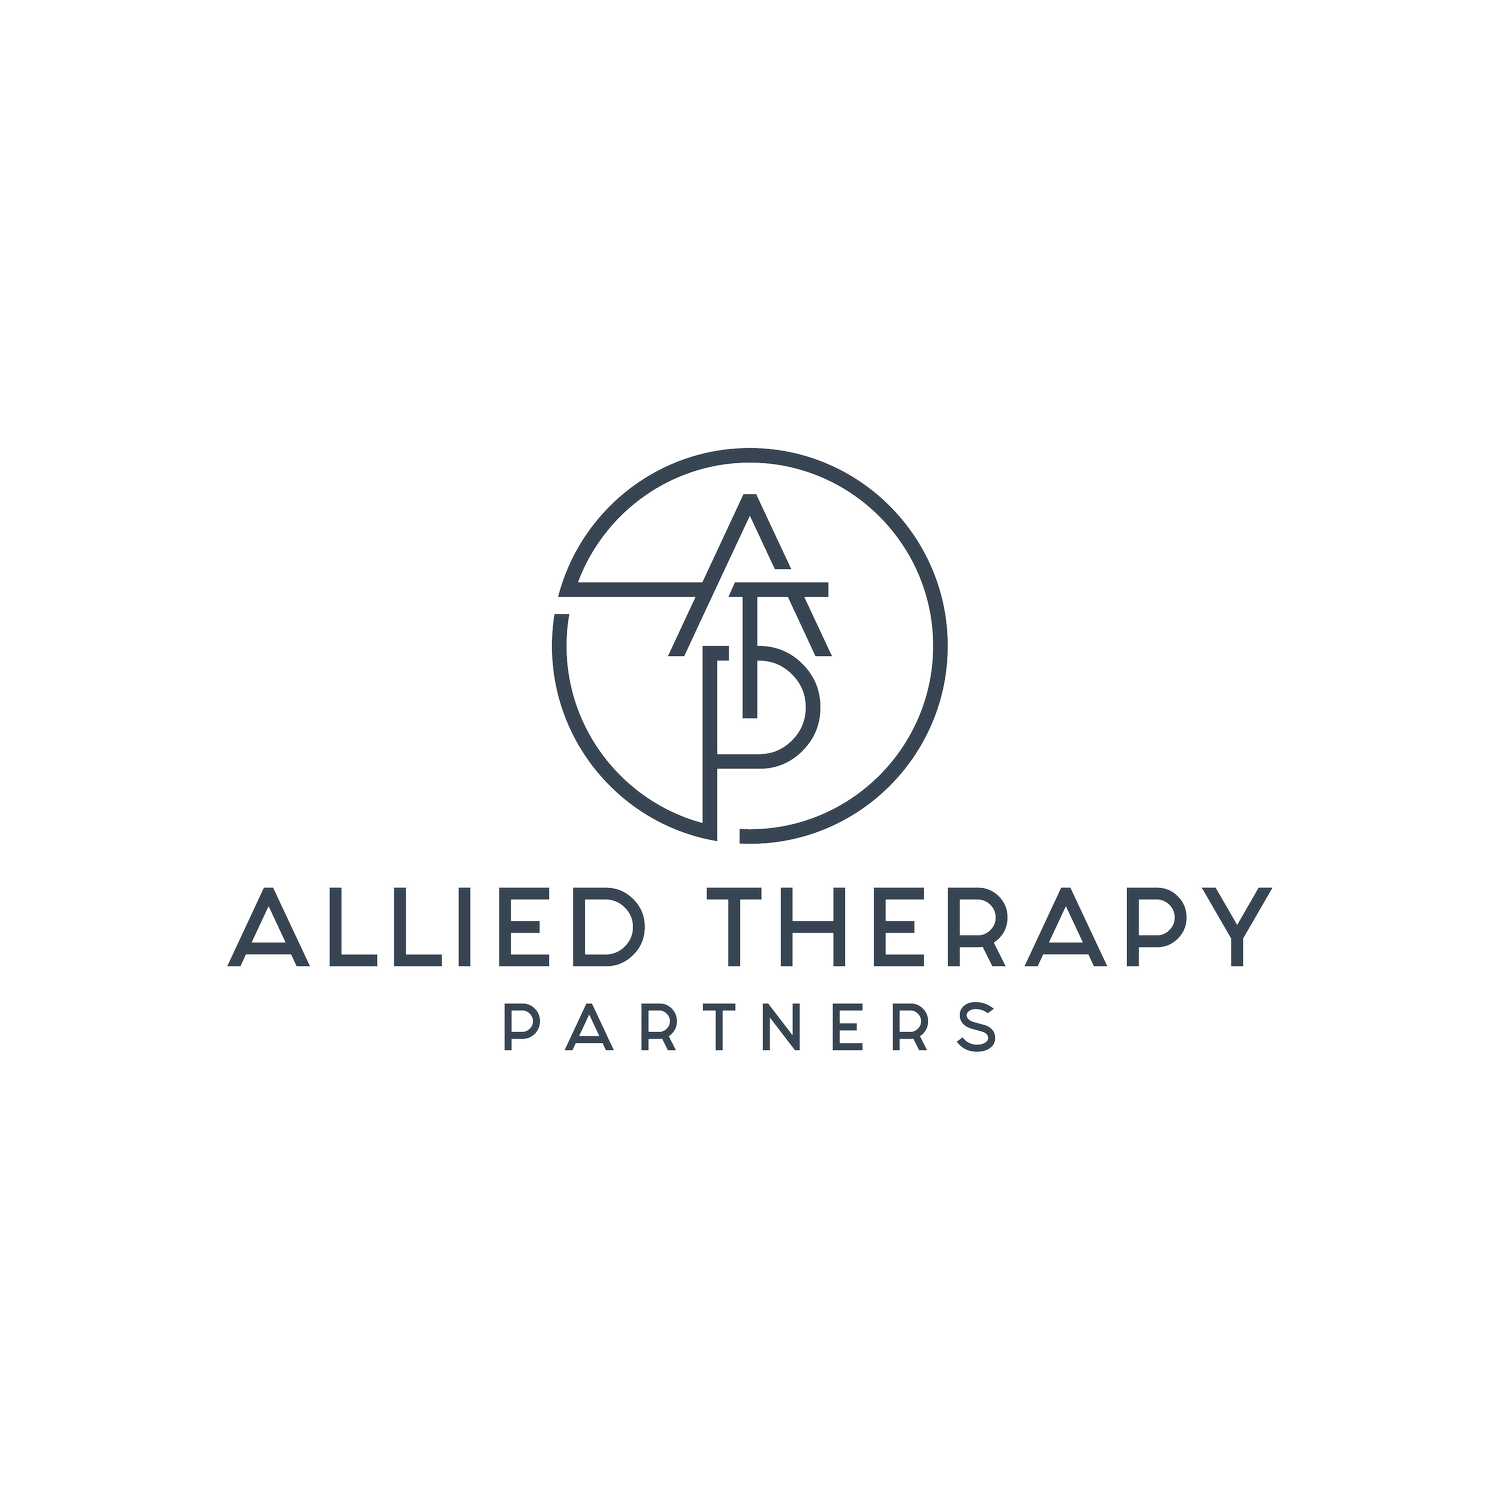 Allied Therapy Partners